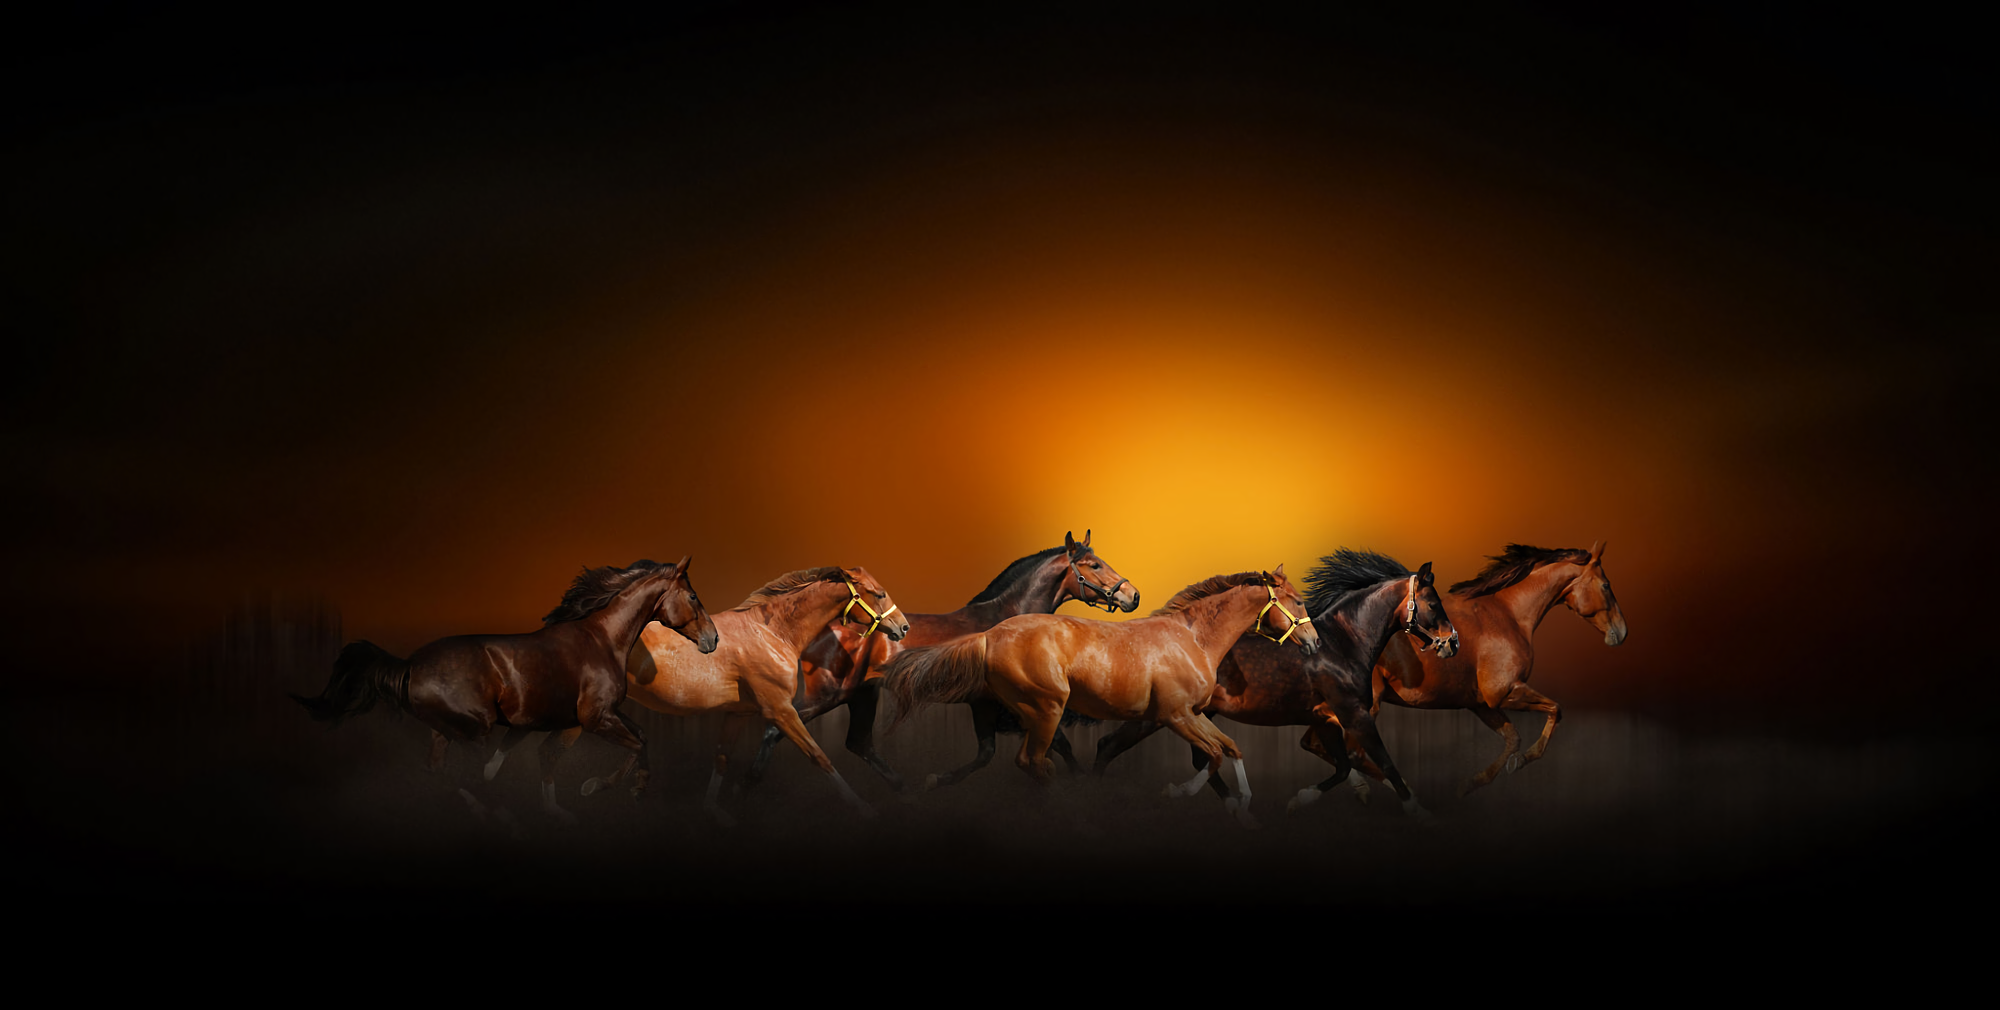 Horses Galloping in the Sunset by Nasser Osman